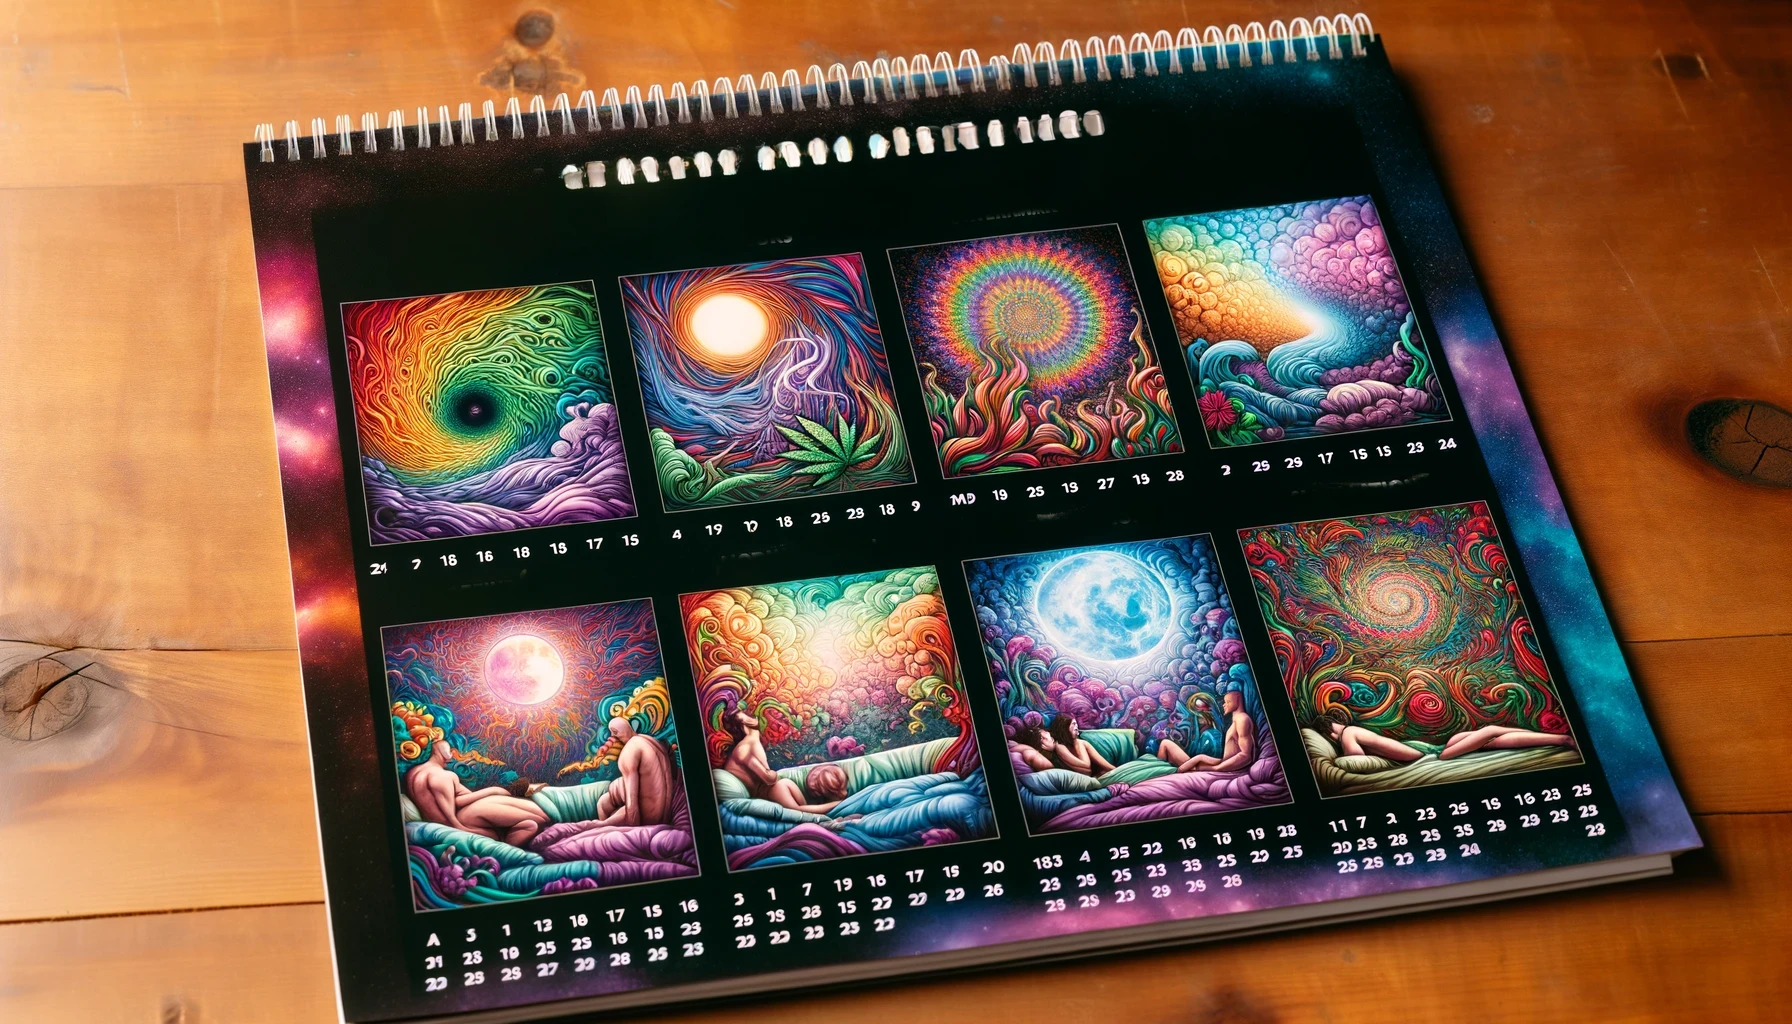 Calendar with dream-themed imagery representing changes in dream intensity